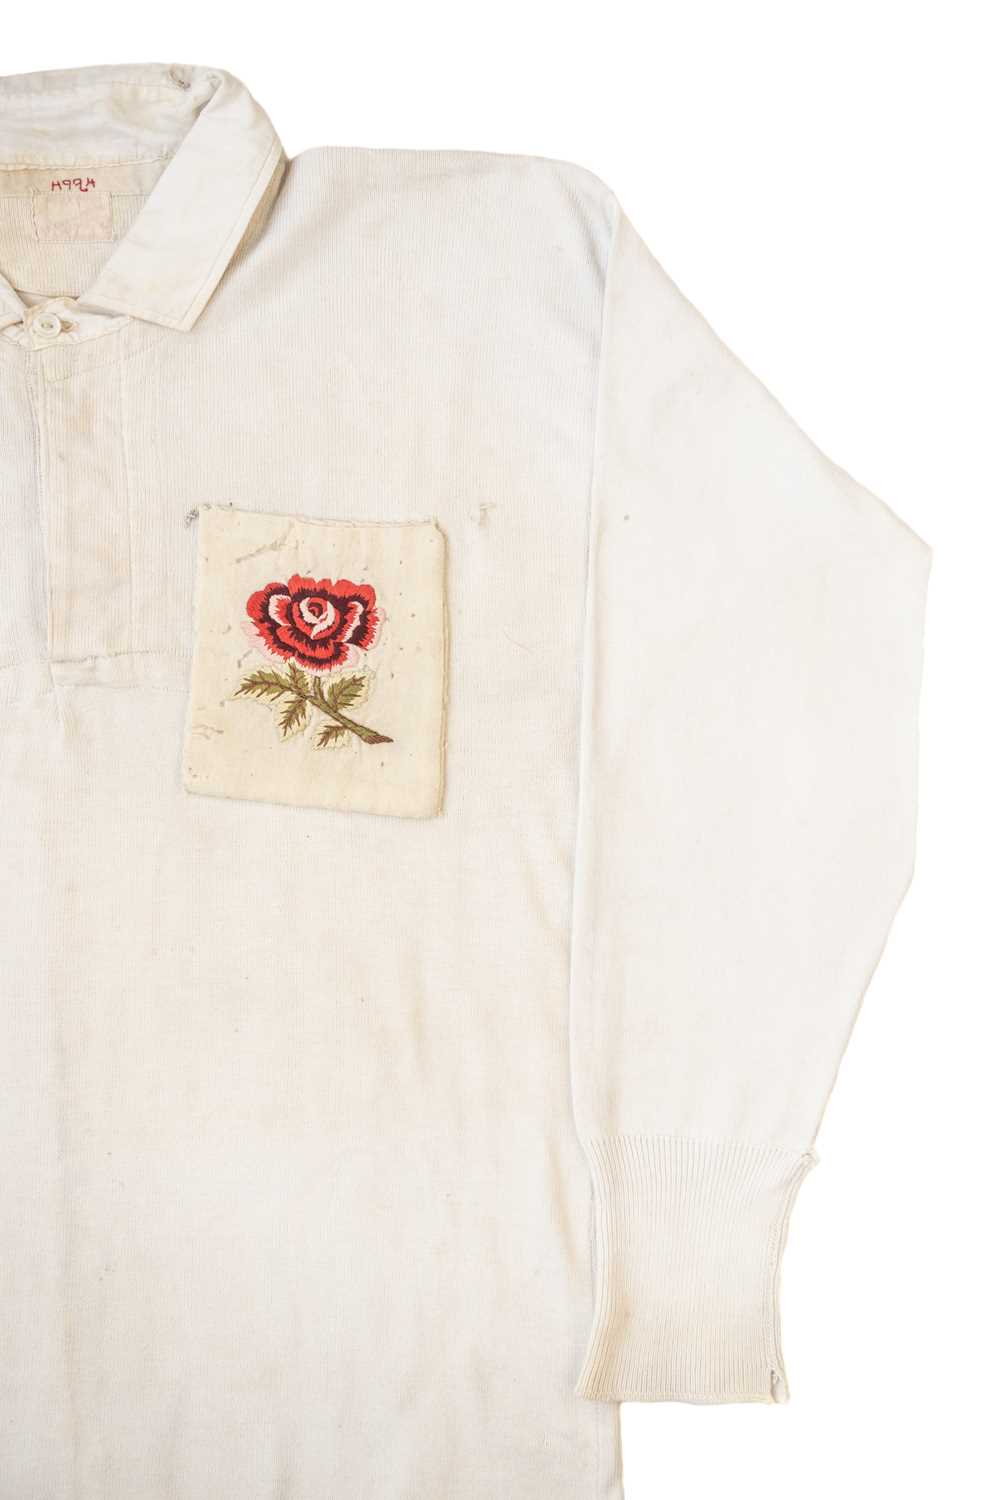 A c.1910 ENGLAND INTERNATIONAL RUGBY UNION MATCH-WORN JERSEY VERSUS WALES All white jersey applied - Image 3 of 5